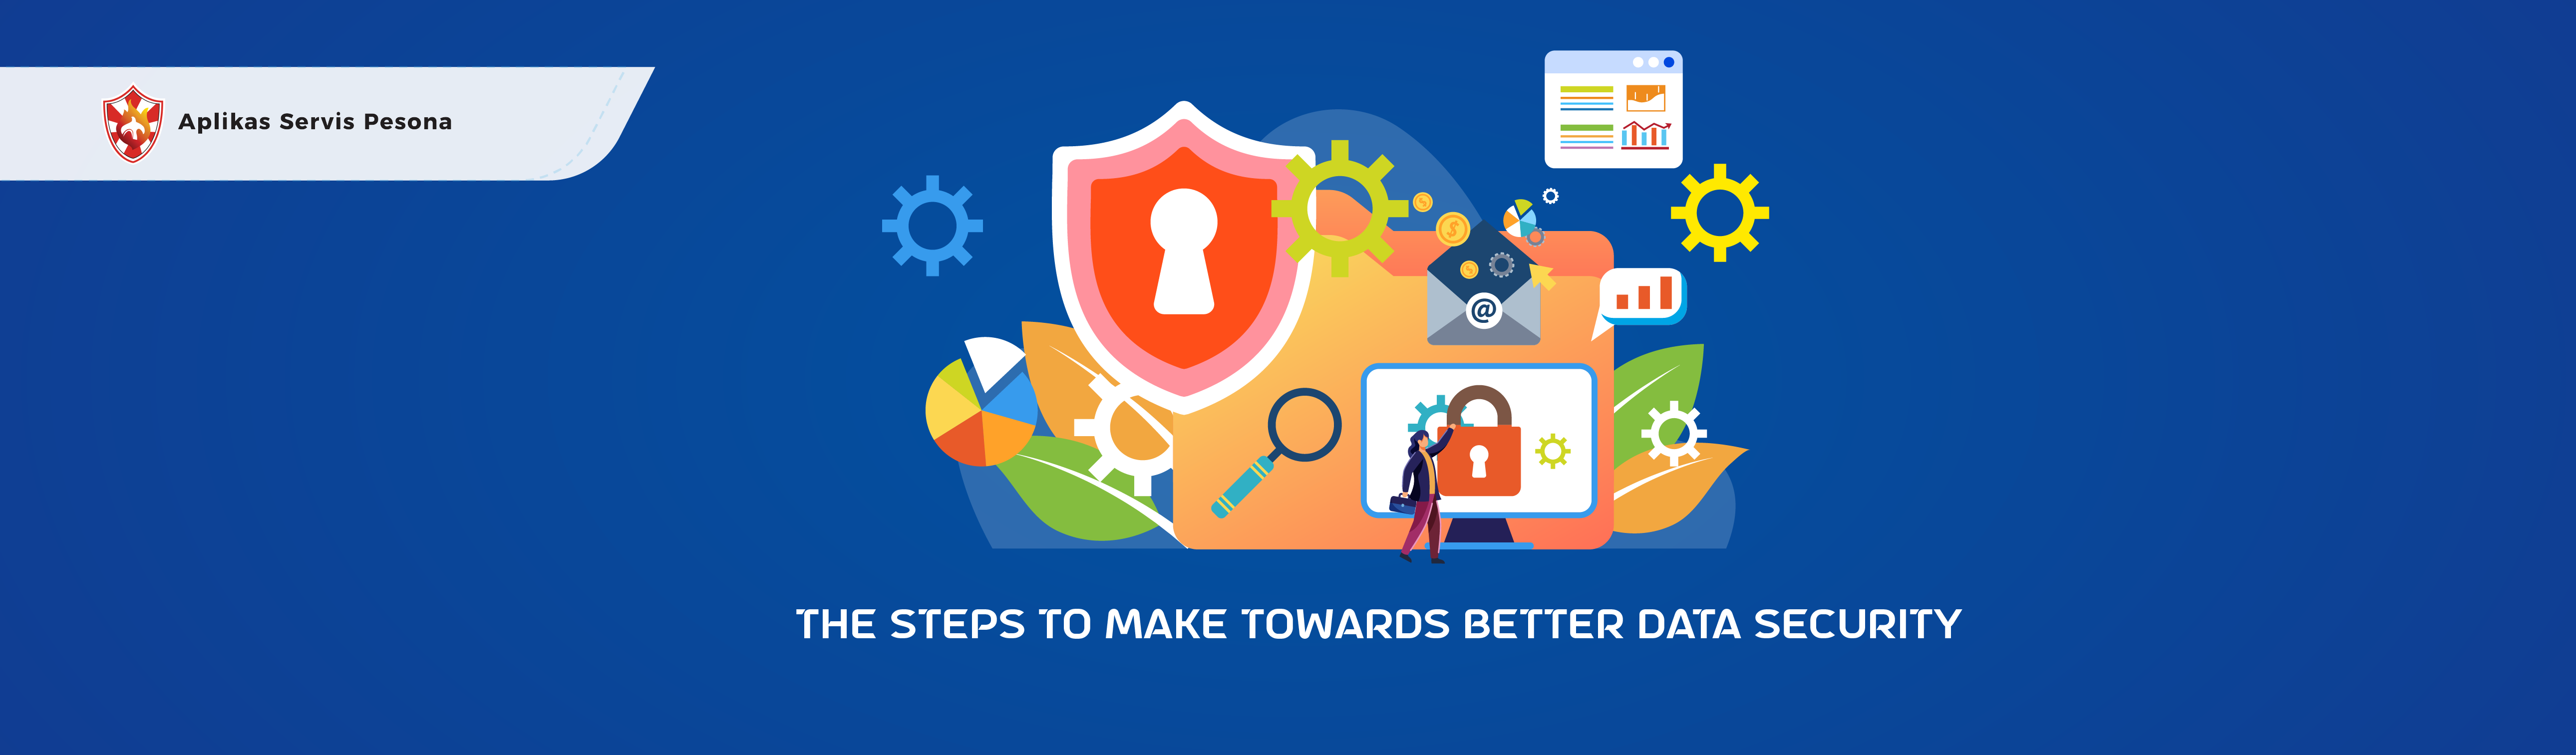 The Steps to Make Towards Better Company Data Security